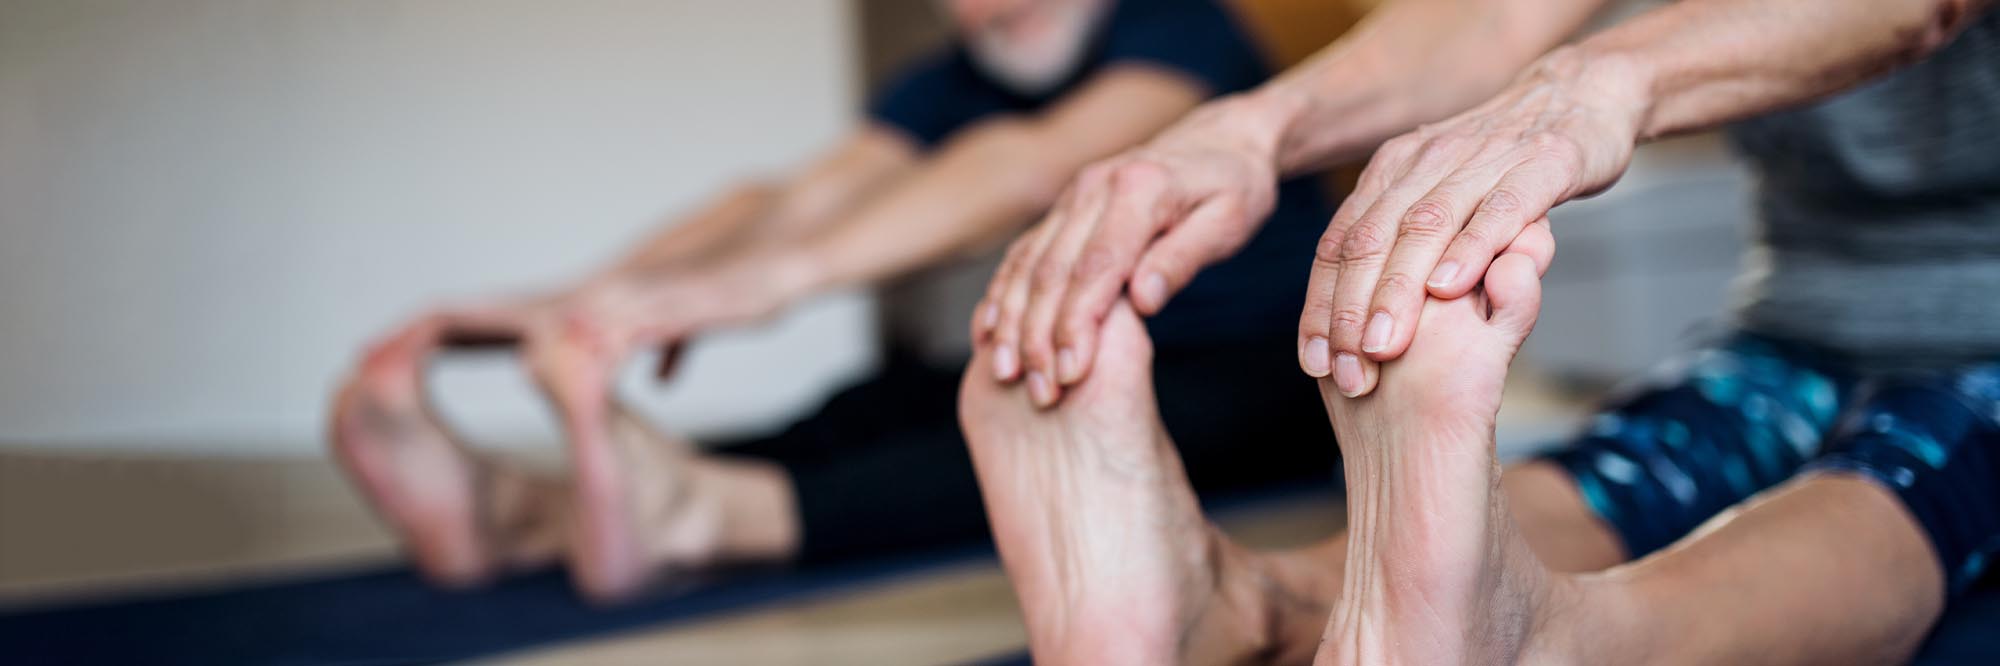 7 exercises and stretches to stop foot pain